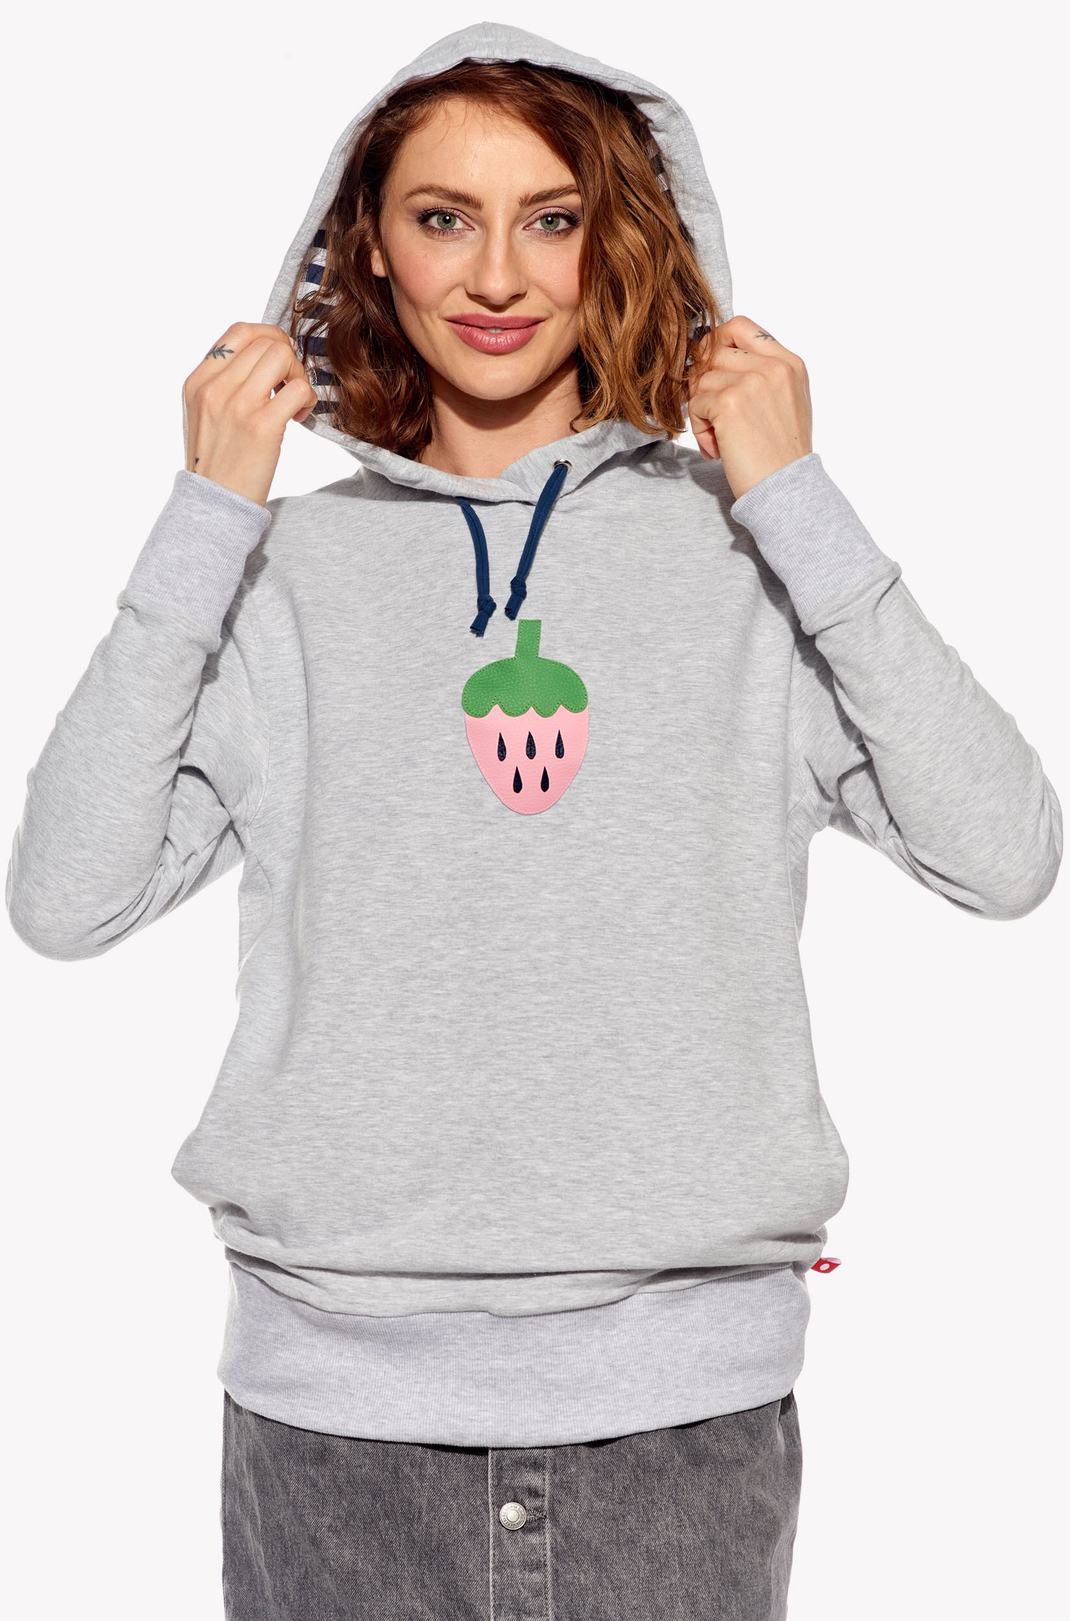 Hoodie with strawberry